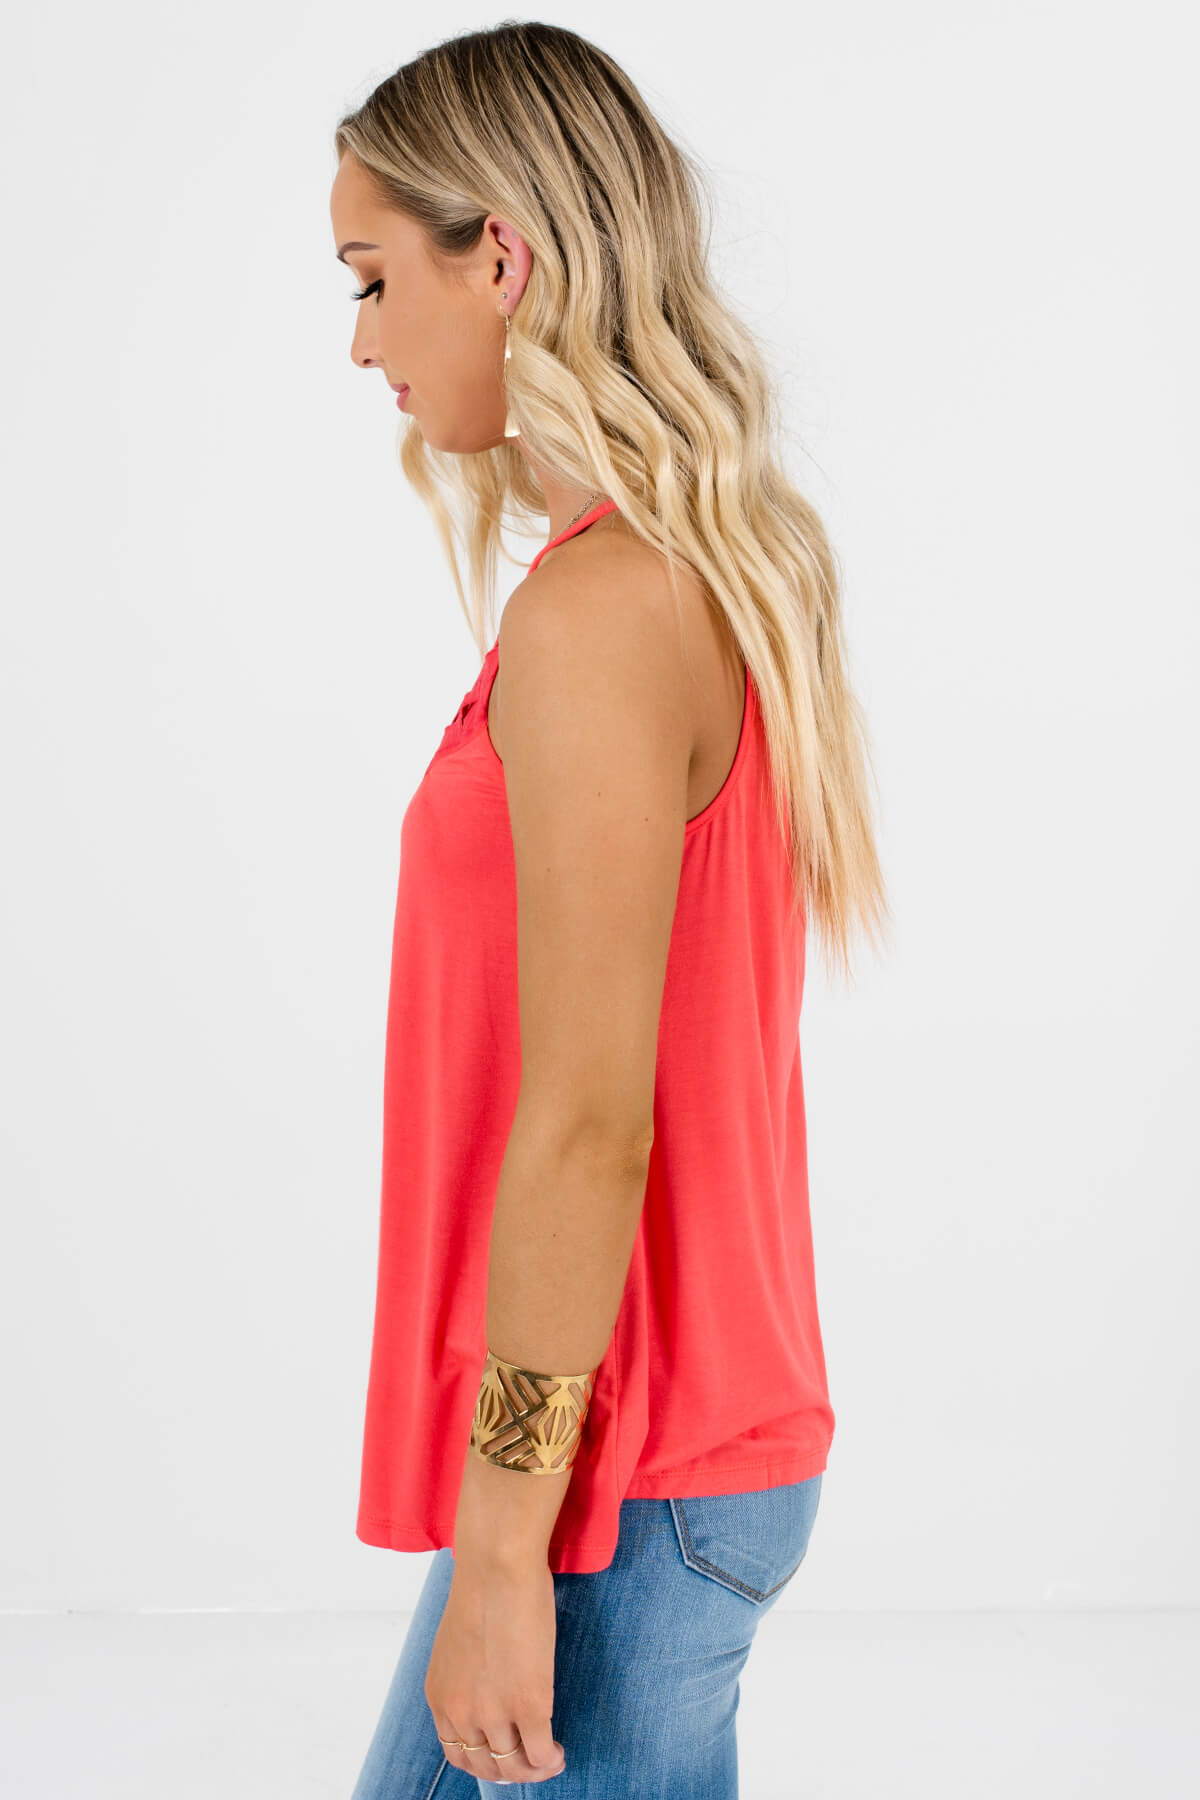 Bright Coral Pink Cutout Tank Tops Affordable Online Boutique